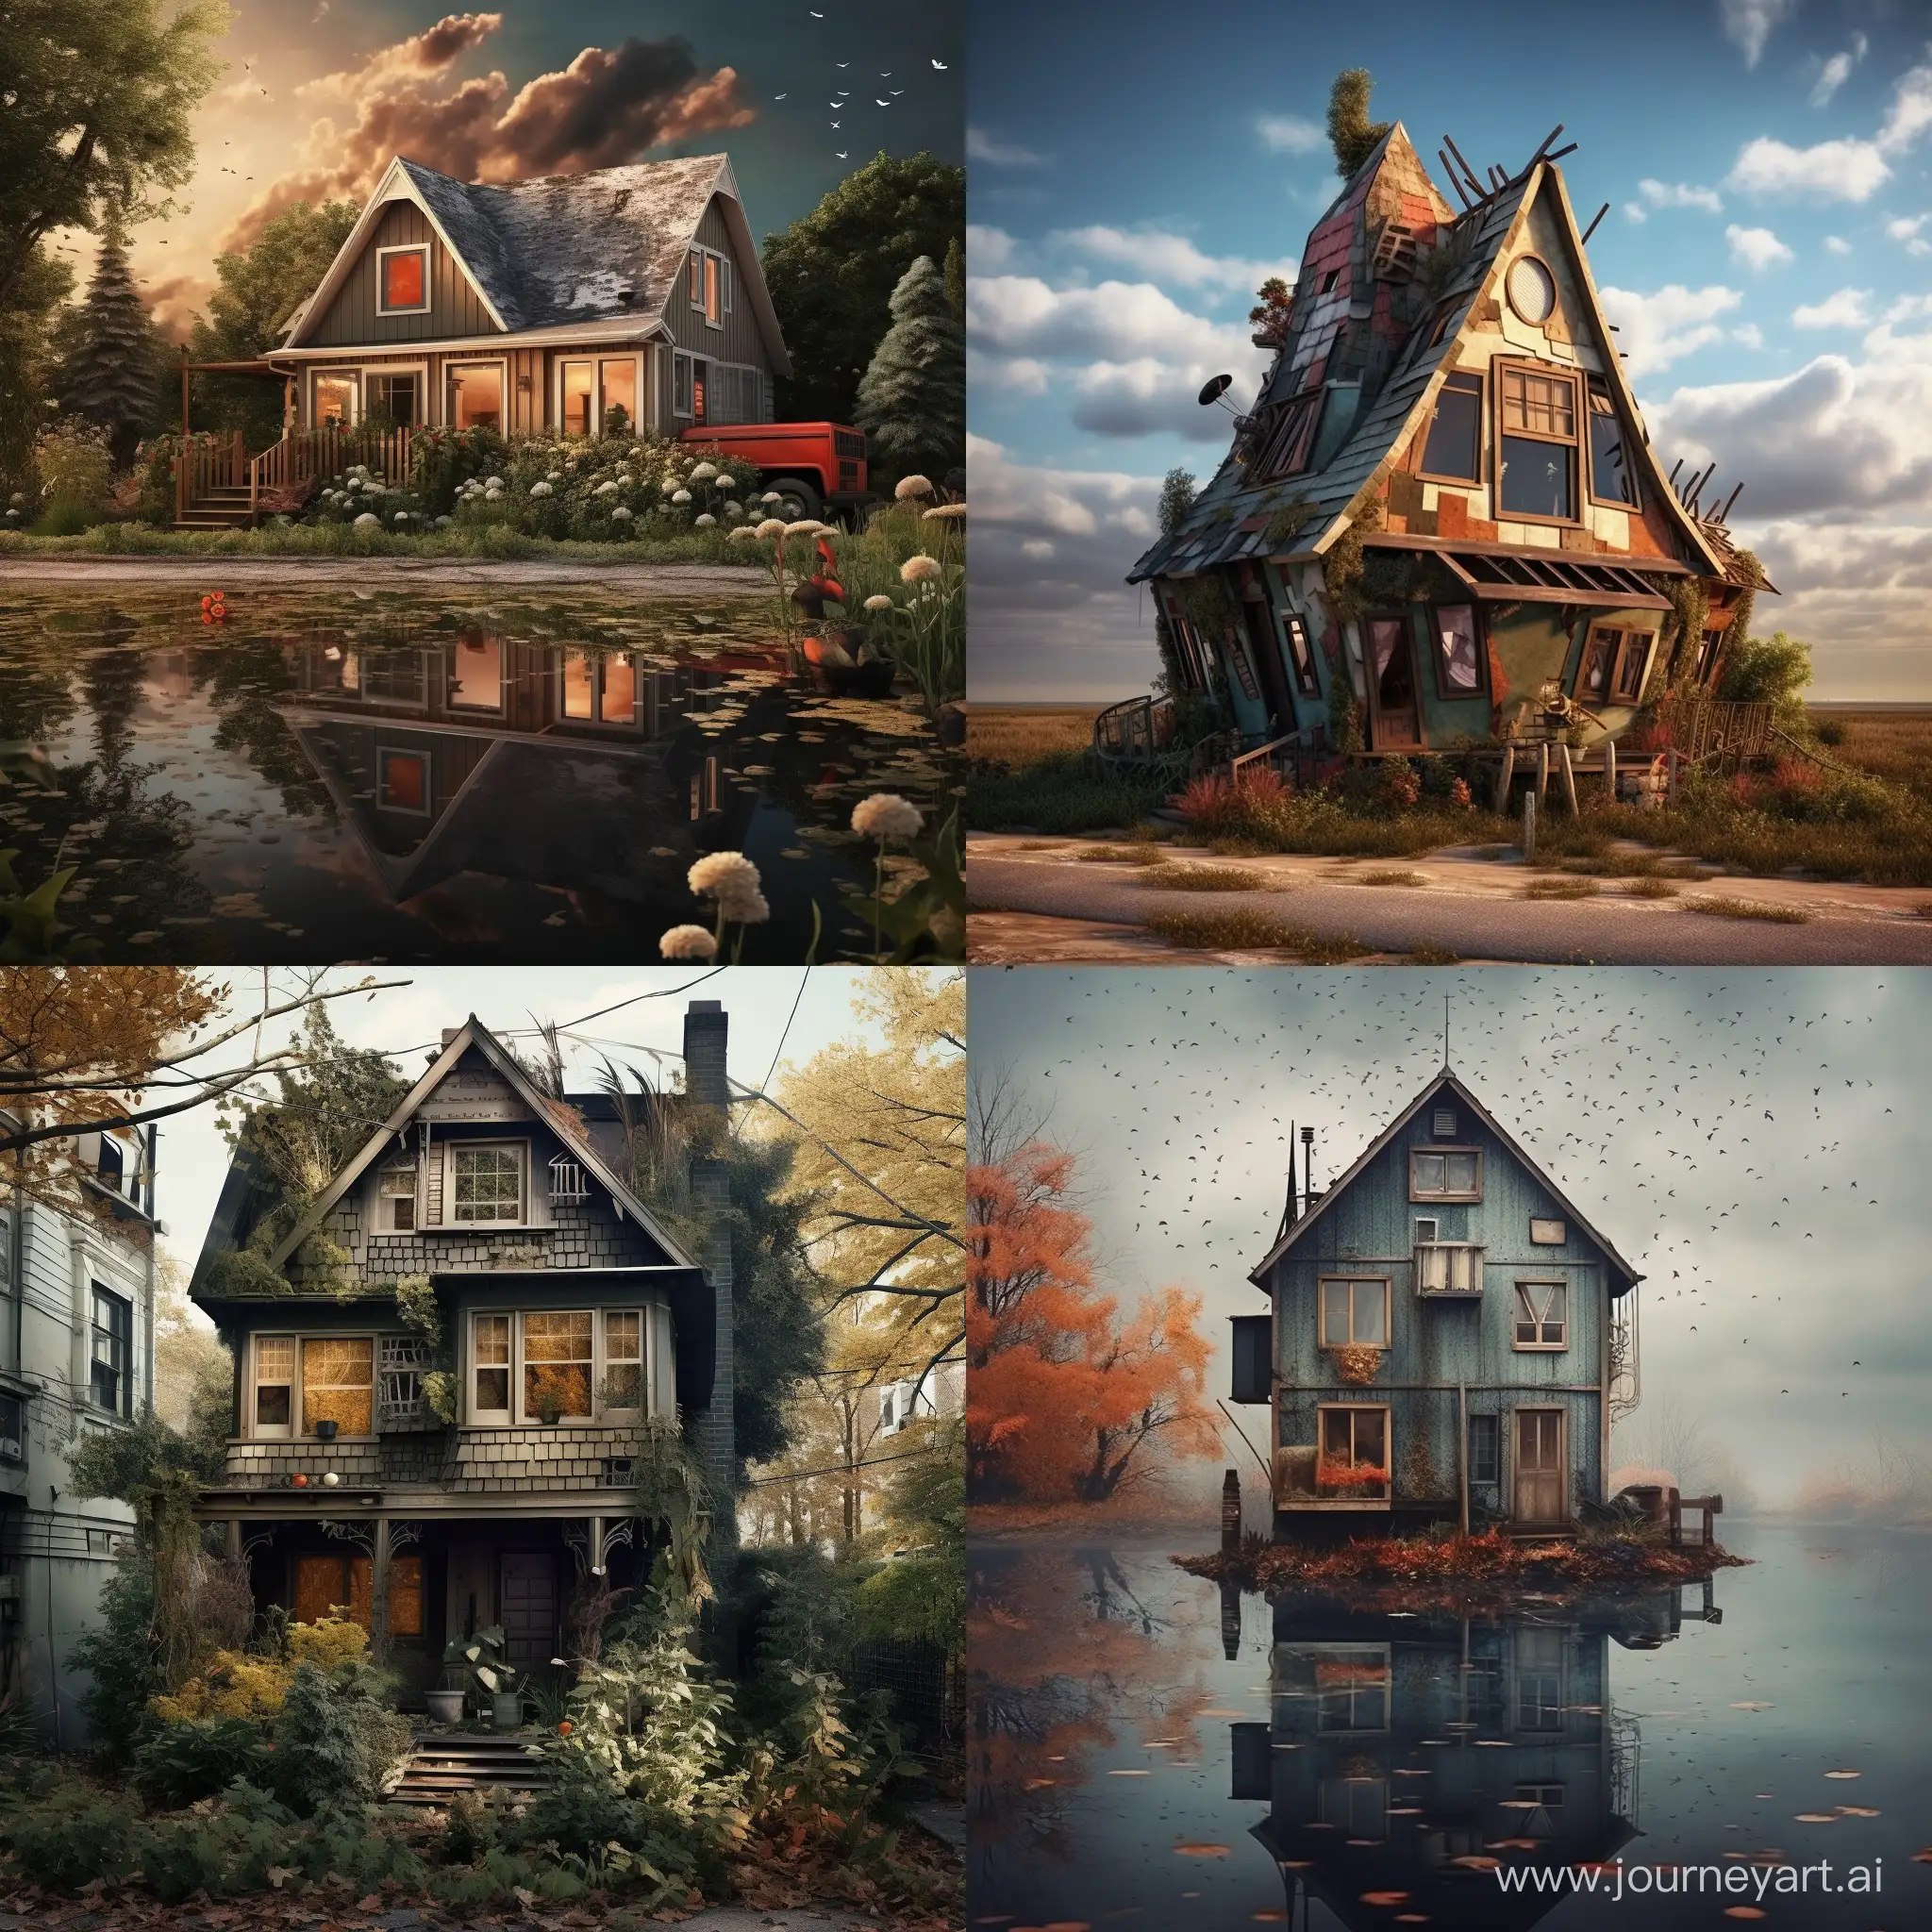 Realistic-House-Photo-with-Artistic-Touch